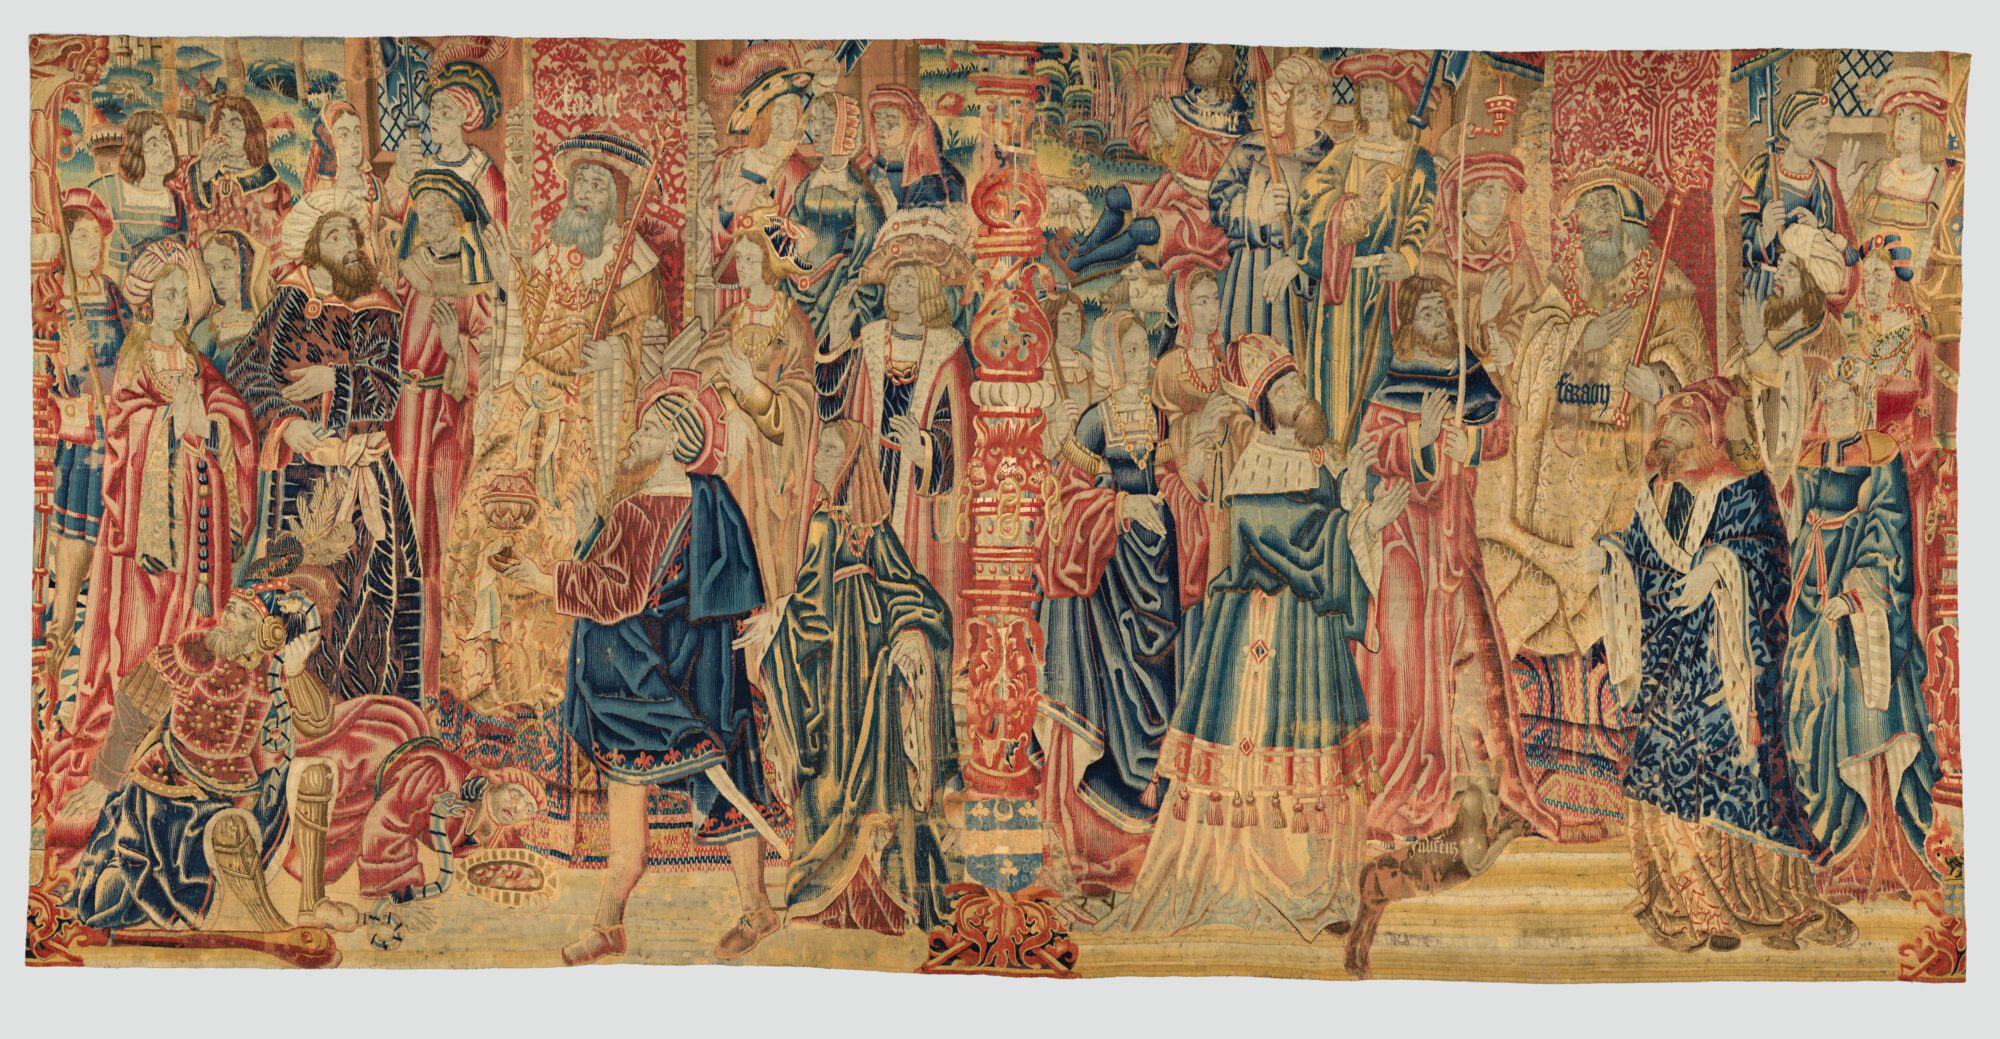 "Mozes and Aaron Before Pharaoh" (ca. 1515-30), a 276.9 x 500.4 wool and silk tapestry of South Netherlandish origin, located in the Metropolitan Museum of Art in New York.